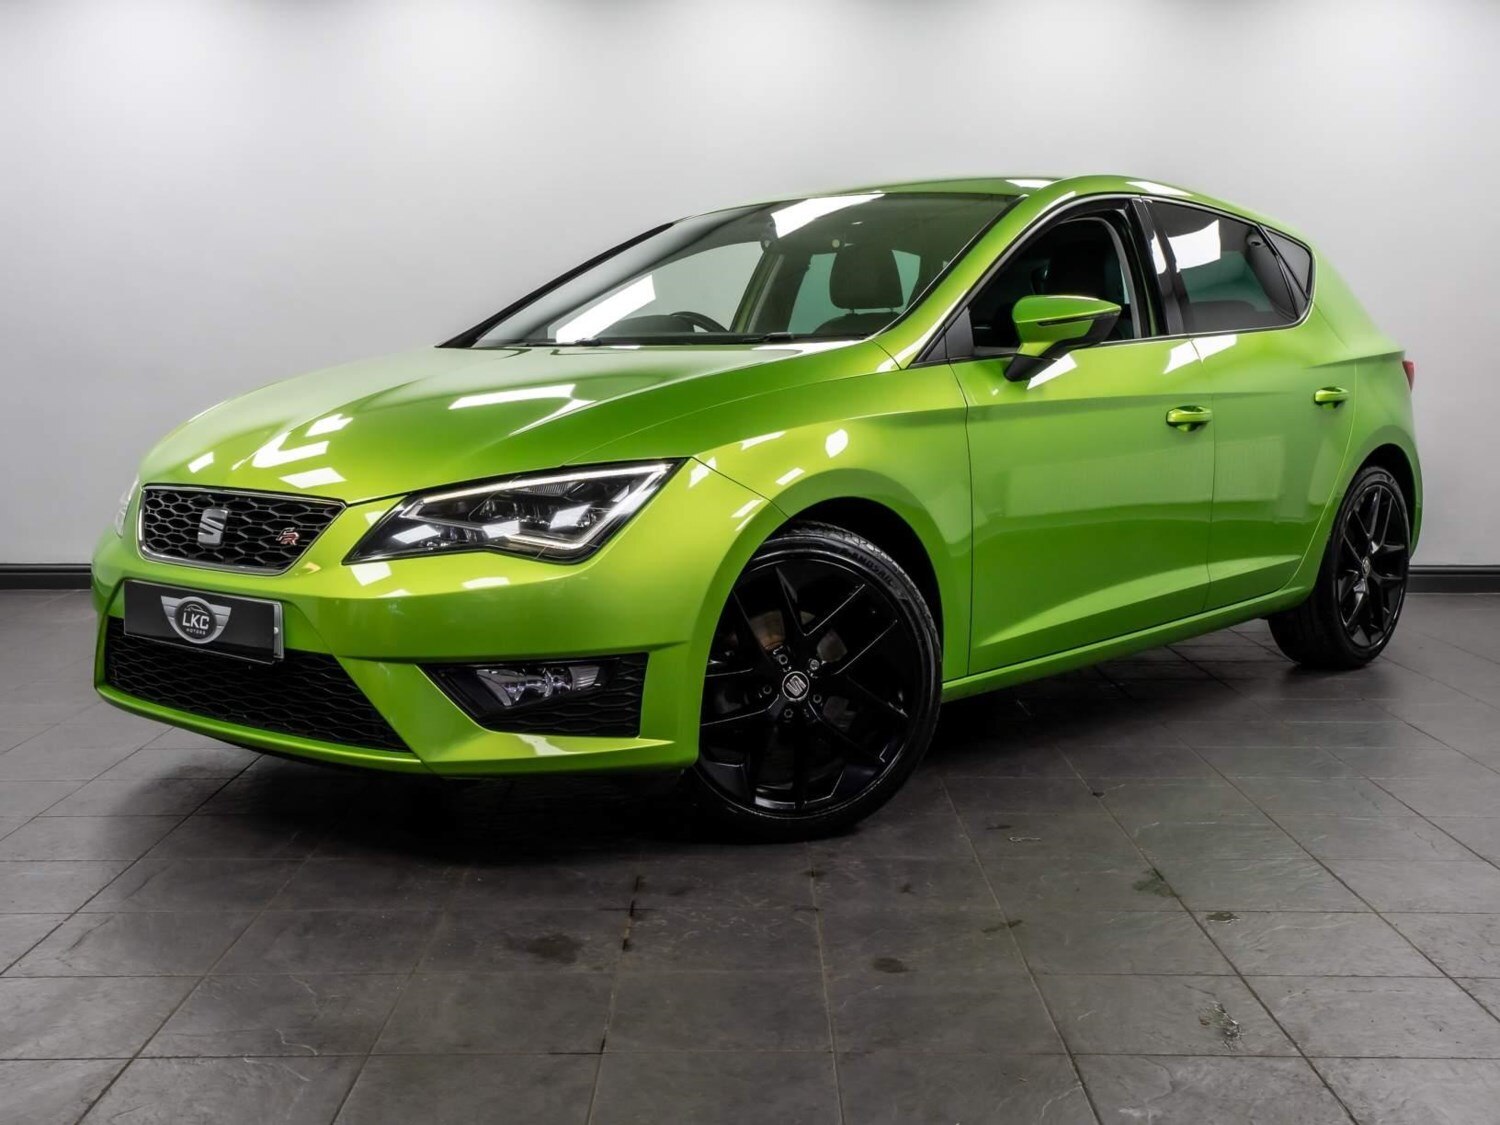 Used Green SEAT Leon for Sale - RAC Cars